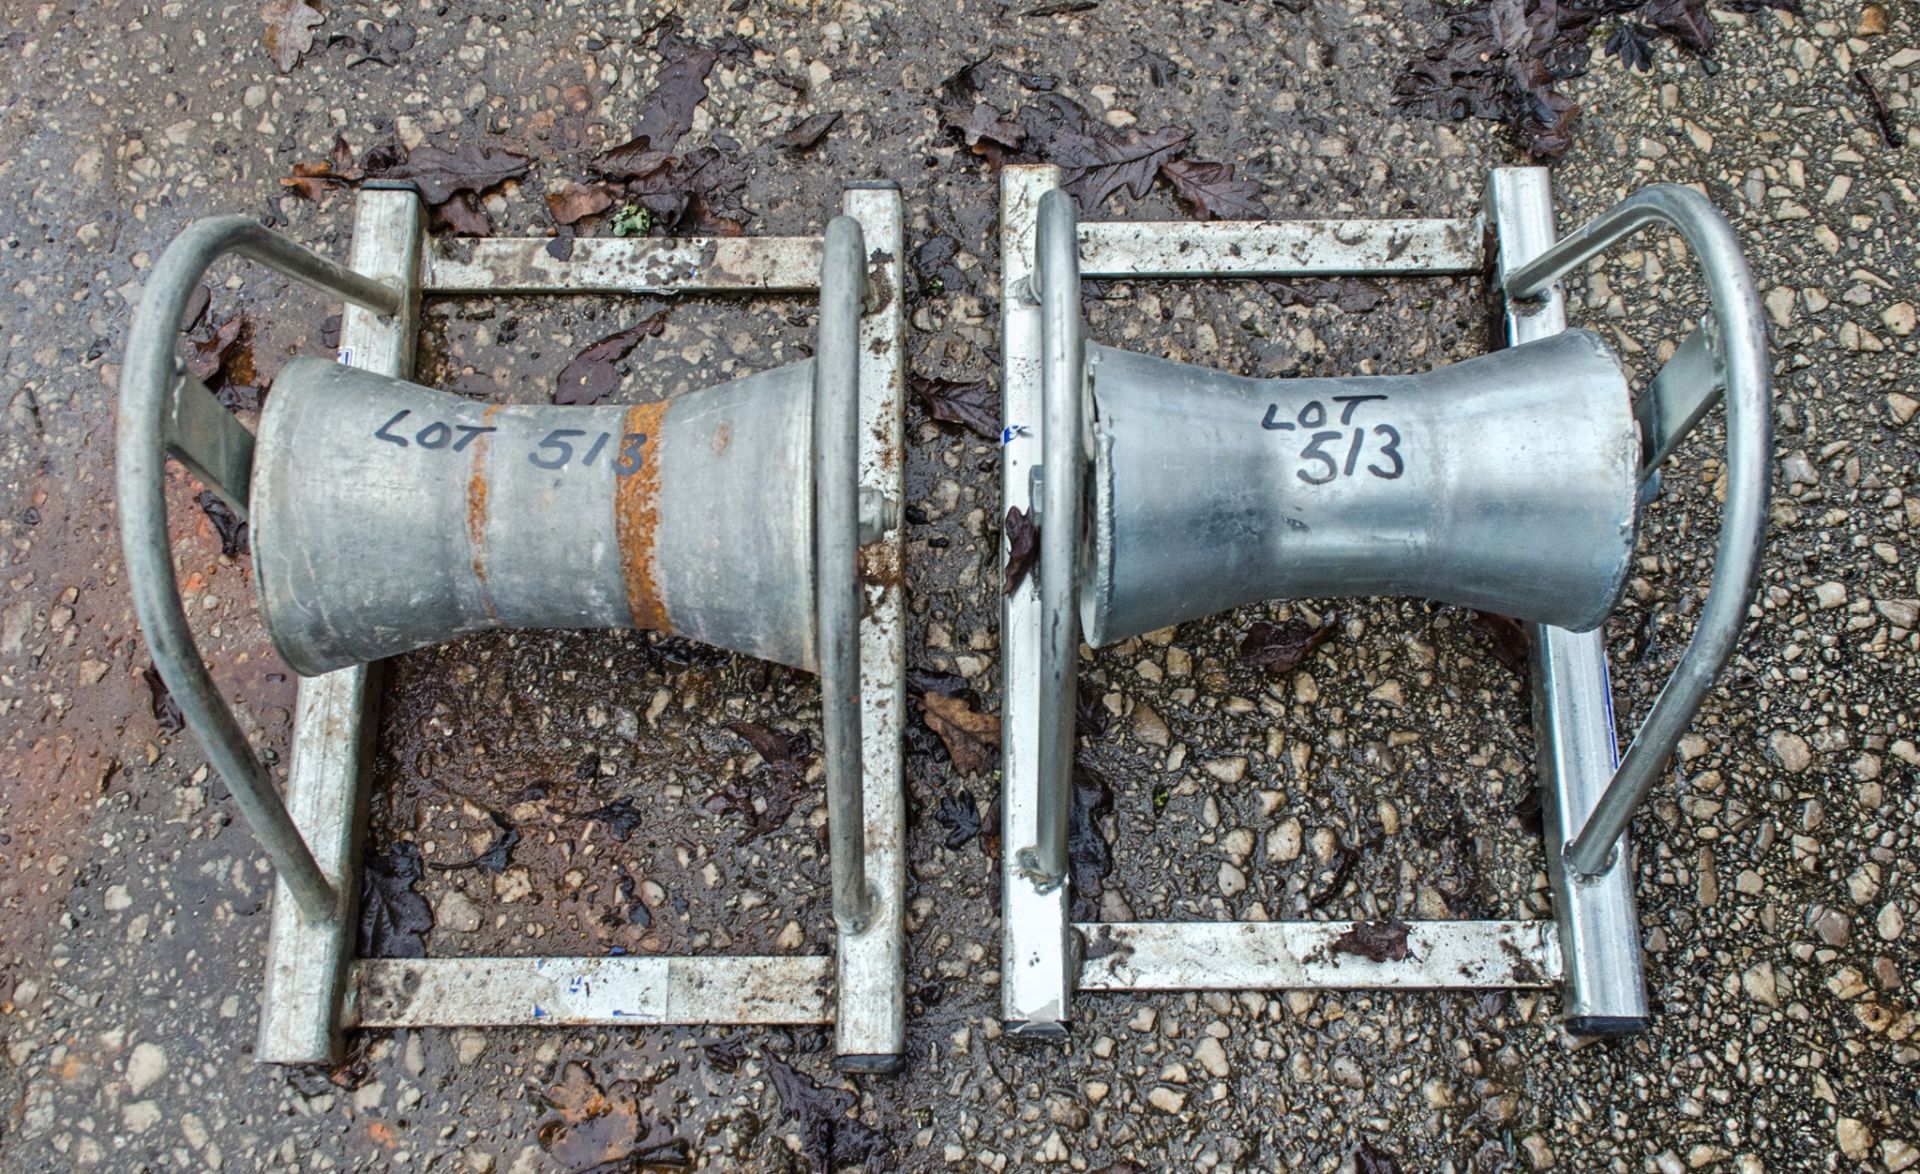 2 - pipe rollers